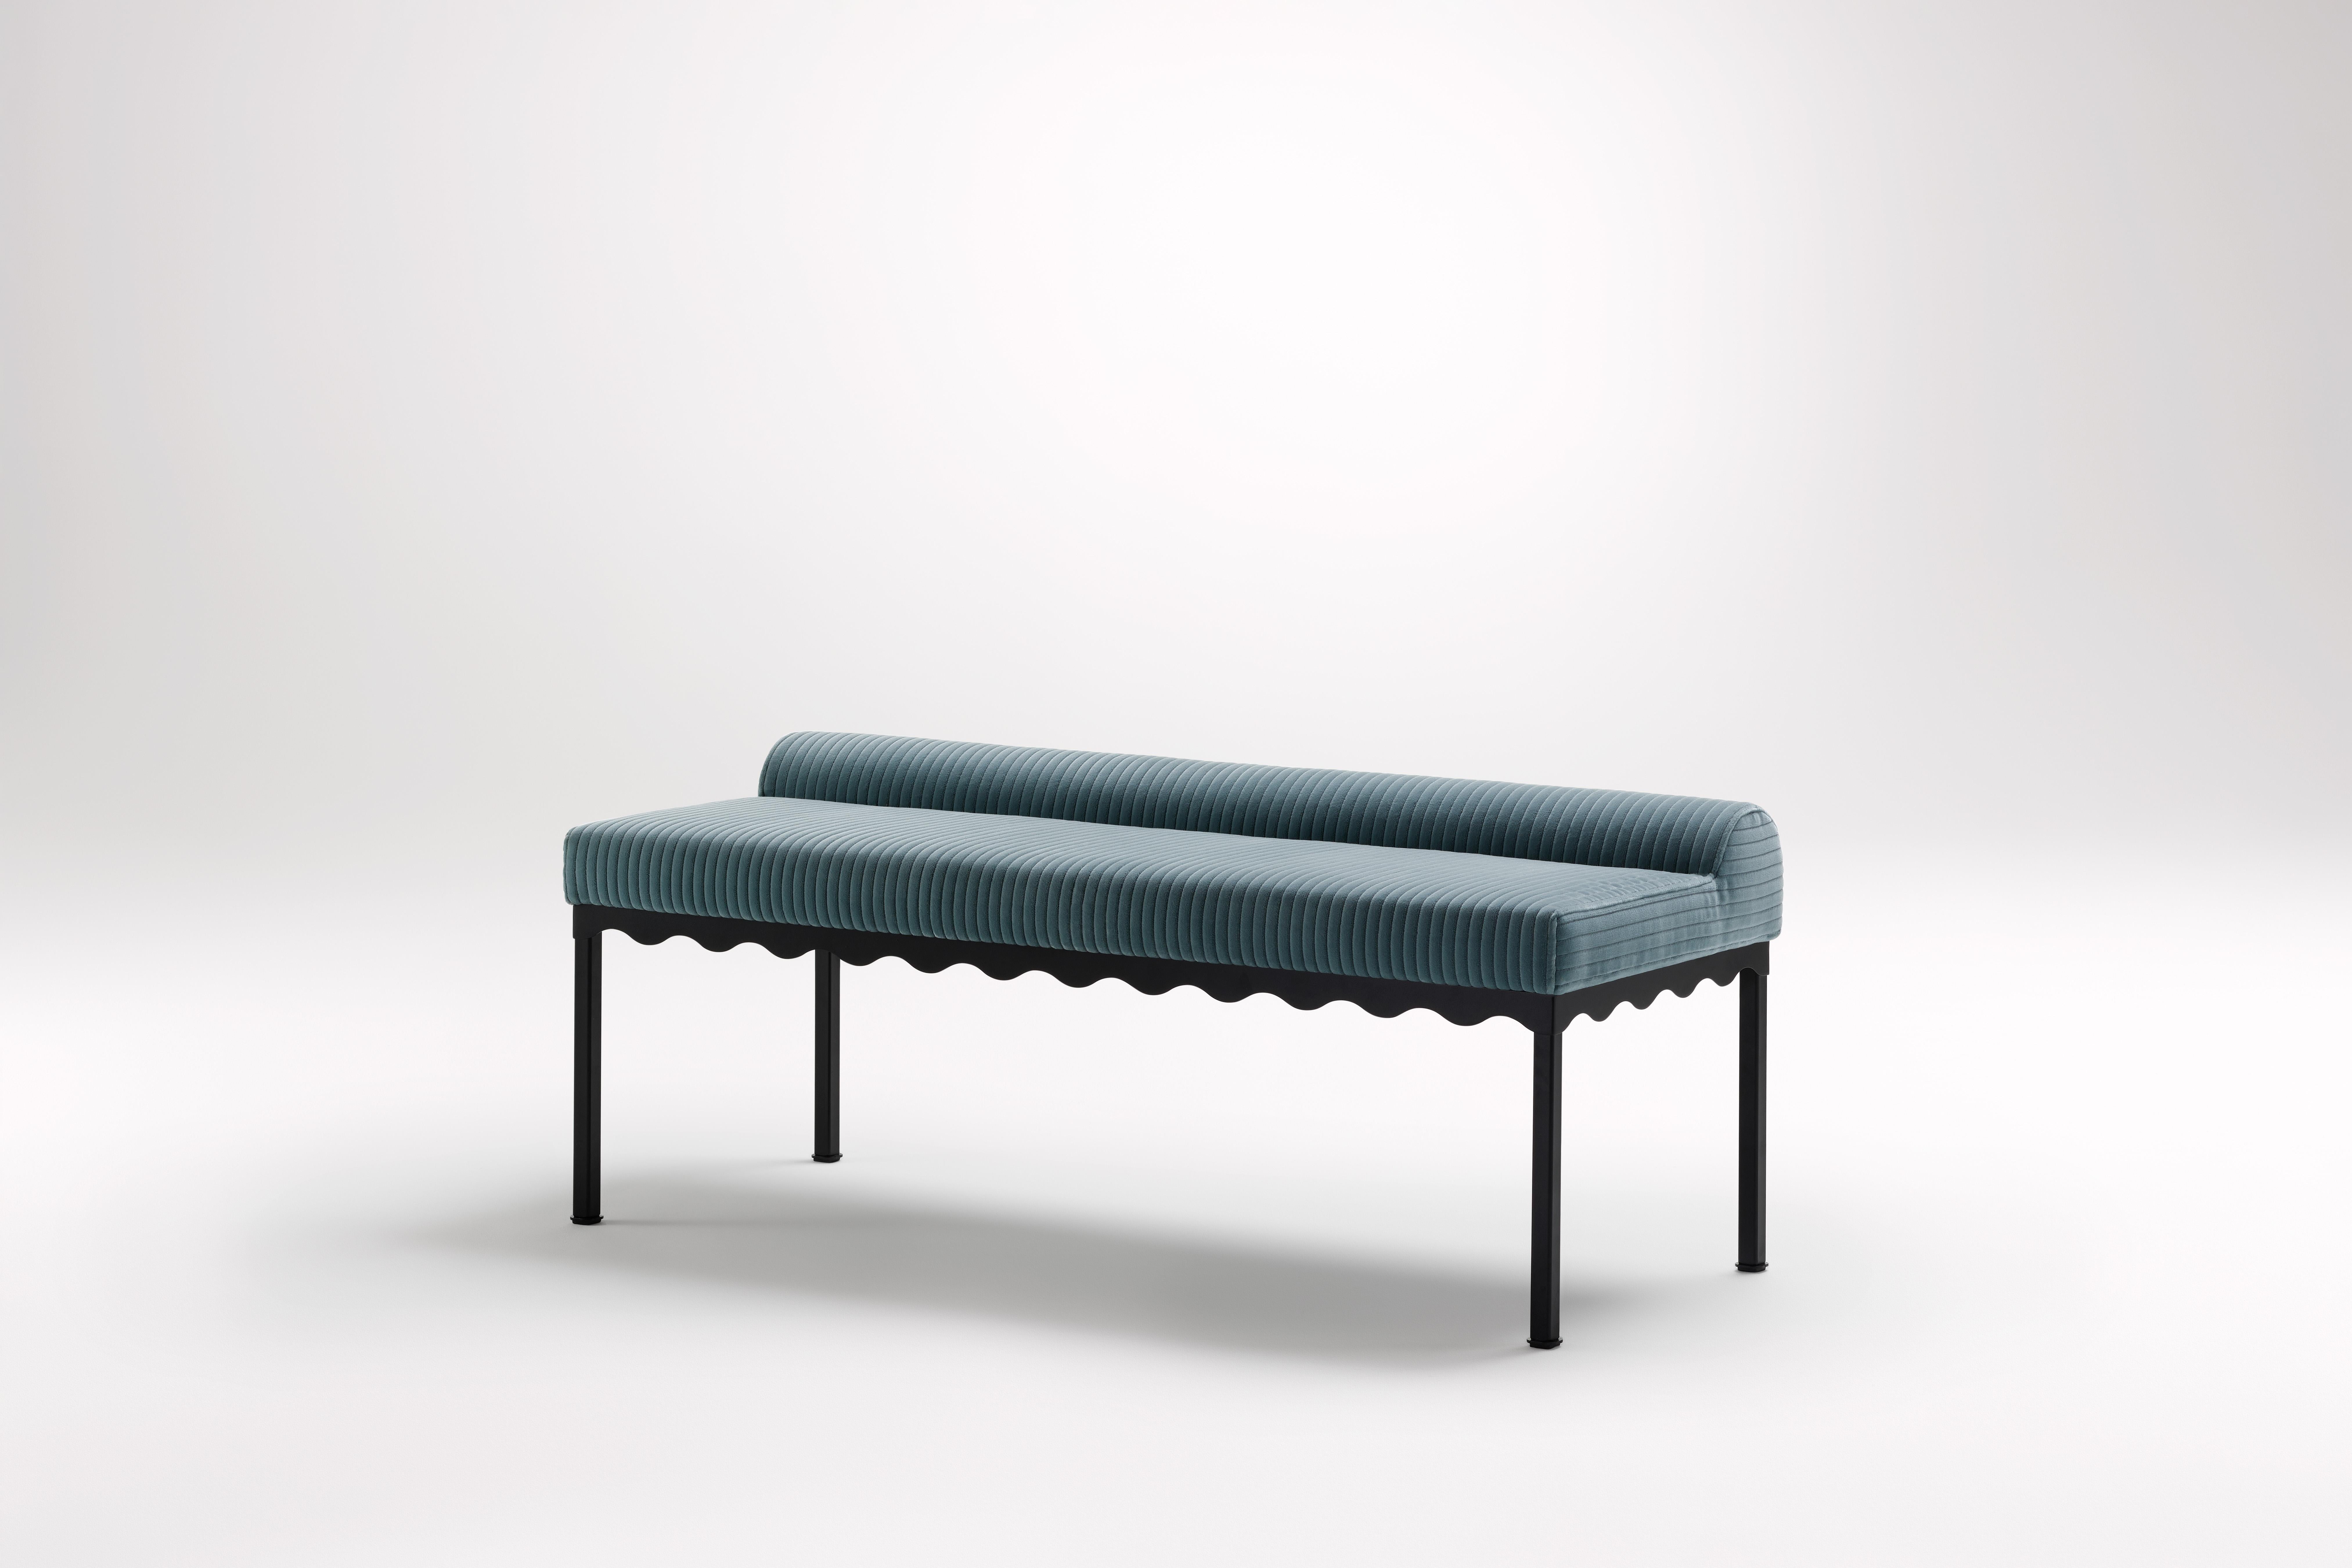 Oracle Bellini 1340 Bench by Coco Flip
Dimensions: D 134 x W 54 x H 52.5 cm
Materials: Timber / Upholstered tops, Powder-coated steel frame. 
Weight: 20 kg
Frame Finishes: Textura Black.

Coco Flip is a Melbourne based furniture and lighting design